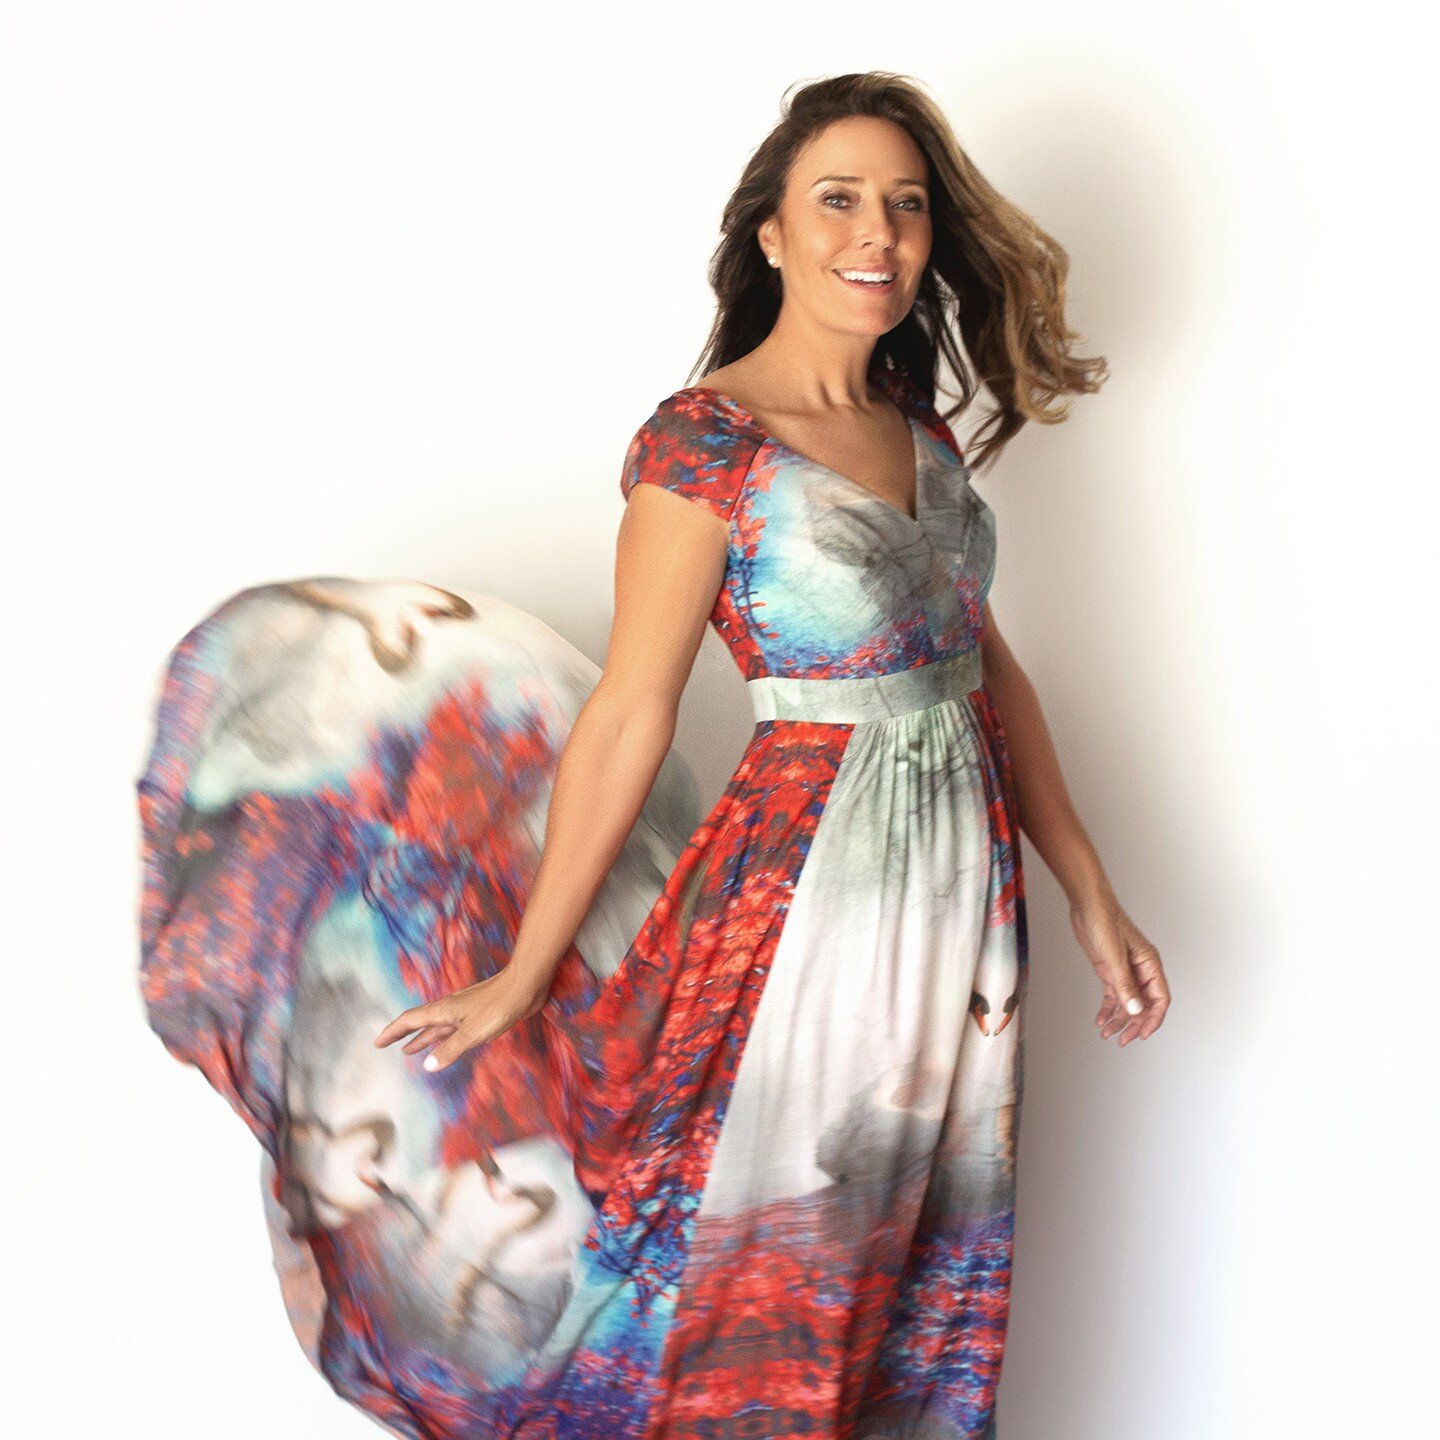 Flowing fabric brings a smile to my face.

Happy Weekend, and Happy International Women&rsquo;s Day!
Warmer days are just around the corner, yayyyy!

#handmadedress #summitnjphotographer #njphotographer